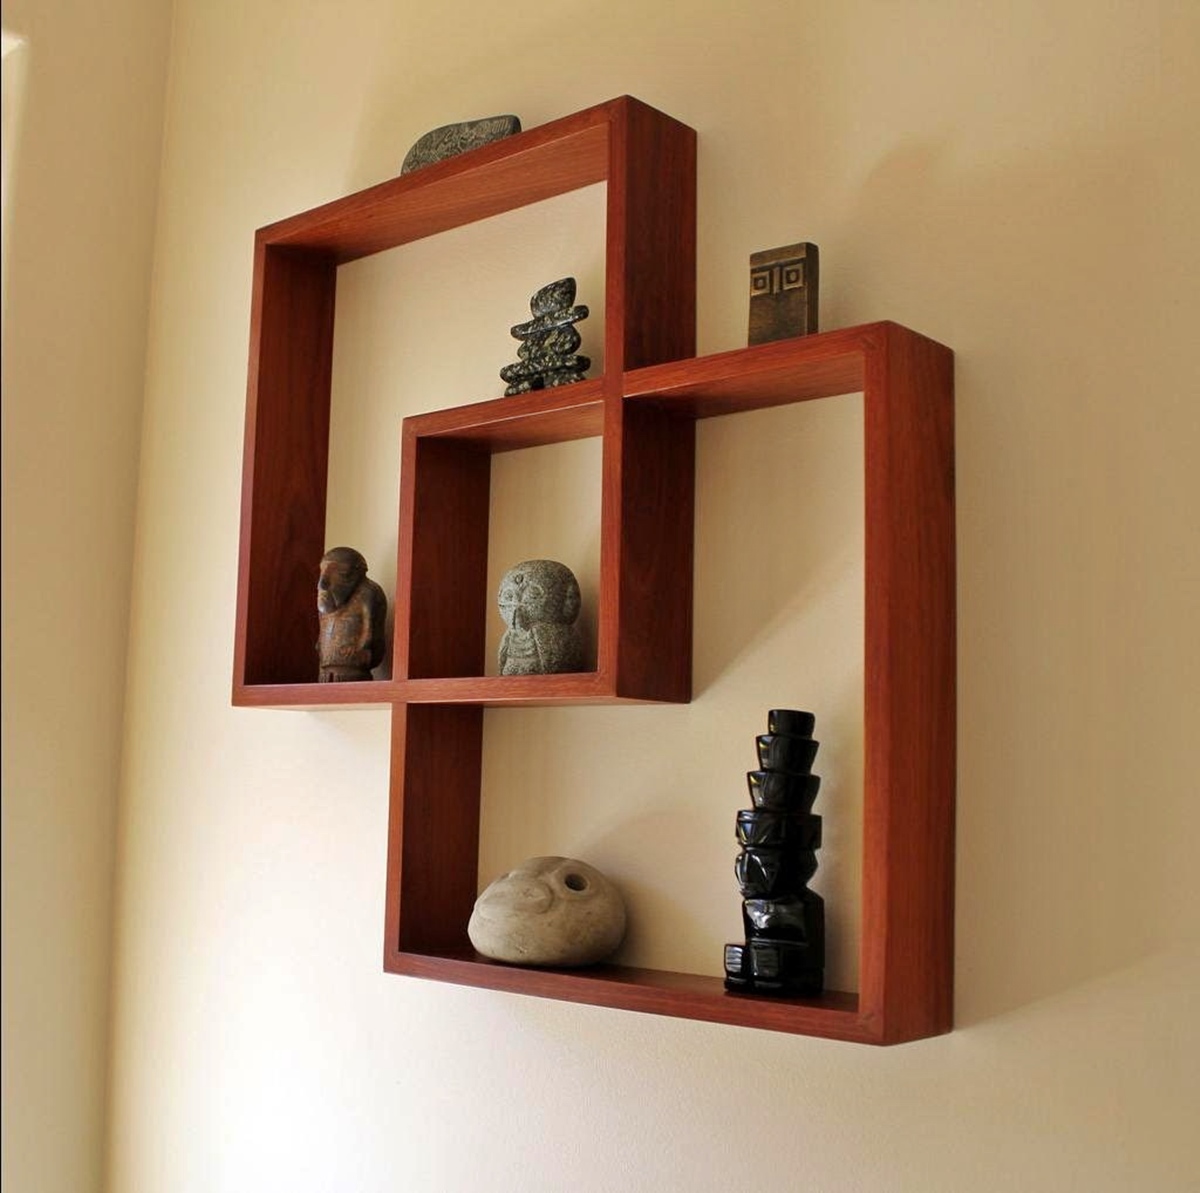 How To Make A Floating Shelf Out Of Wood